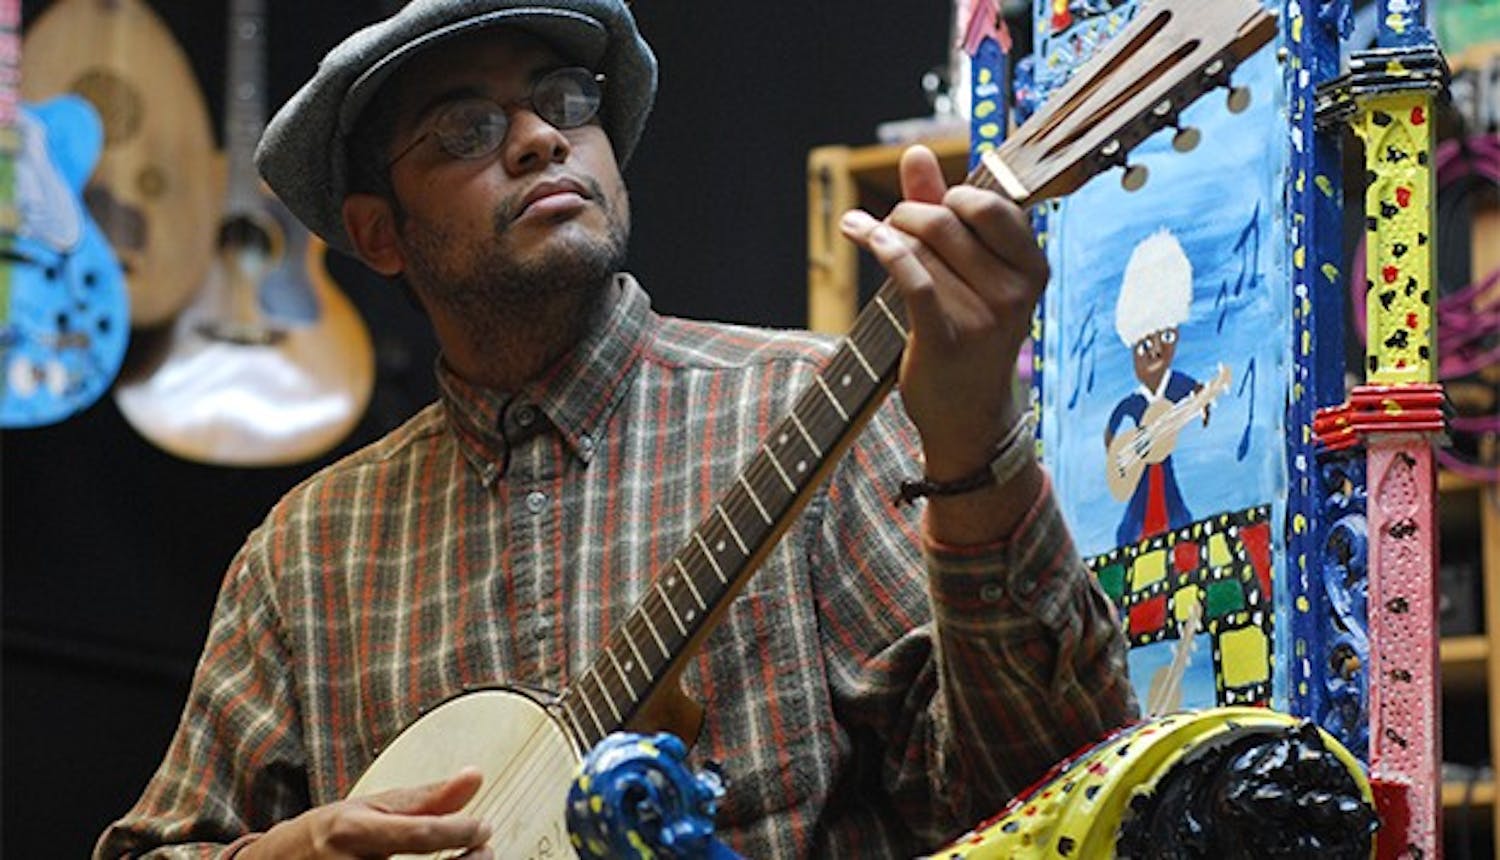 Profile are of Dom Flemons of the Carolina Chocolate Drops in his studio Music Maker Relief Foundation in Hillsborough. 